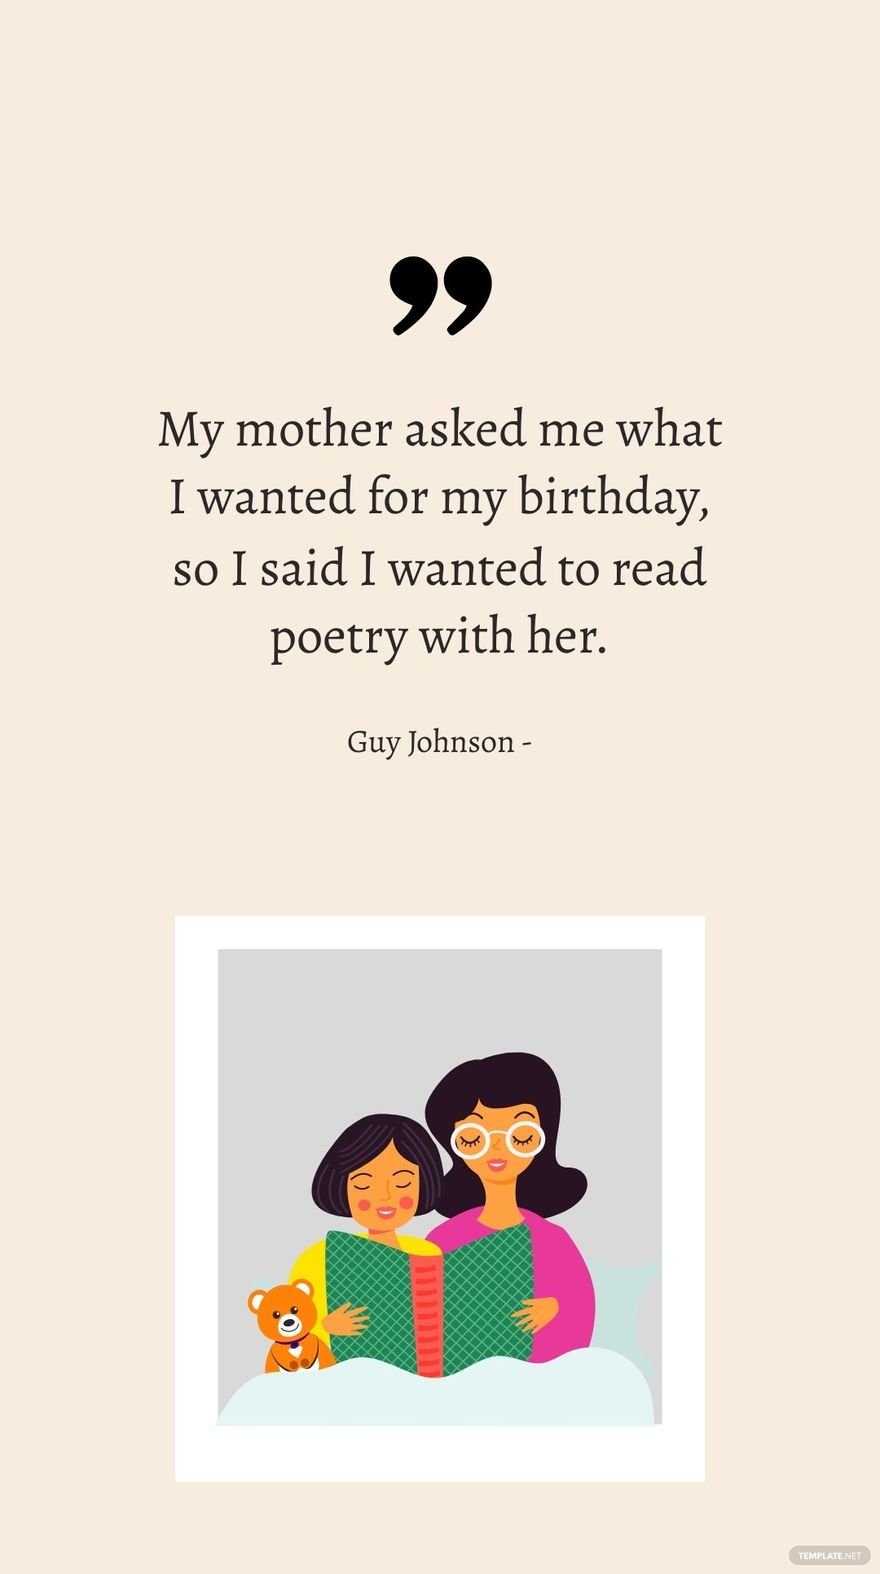 Guy Johnson - My mother asked me what I wanted for my birthday, so I said I wanted to read poetry with her.